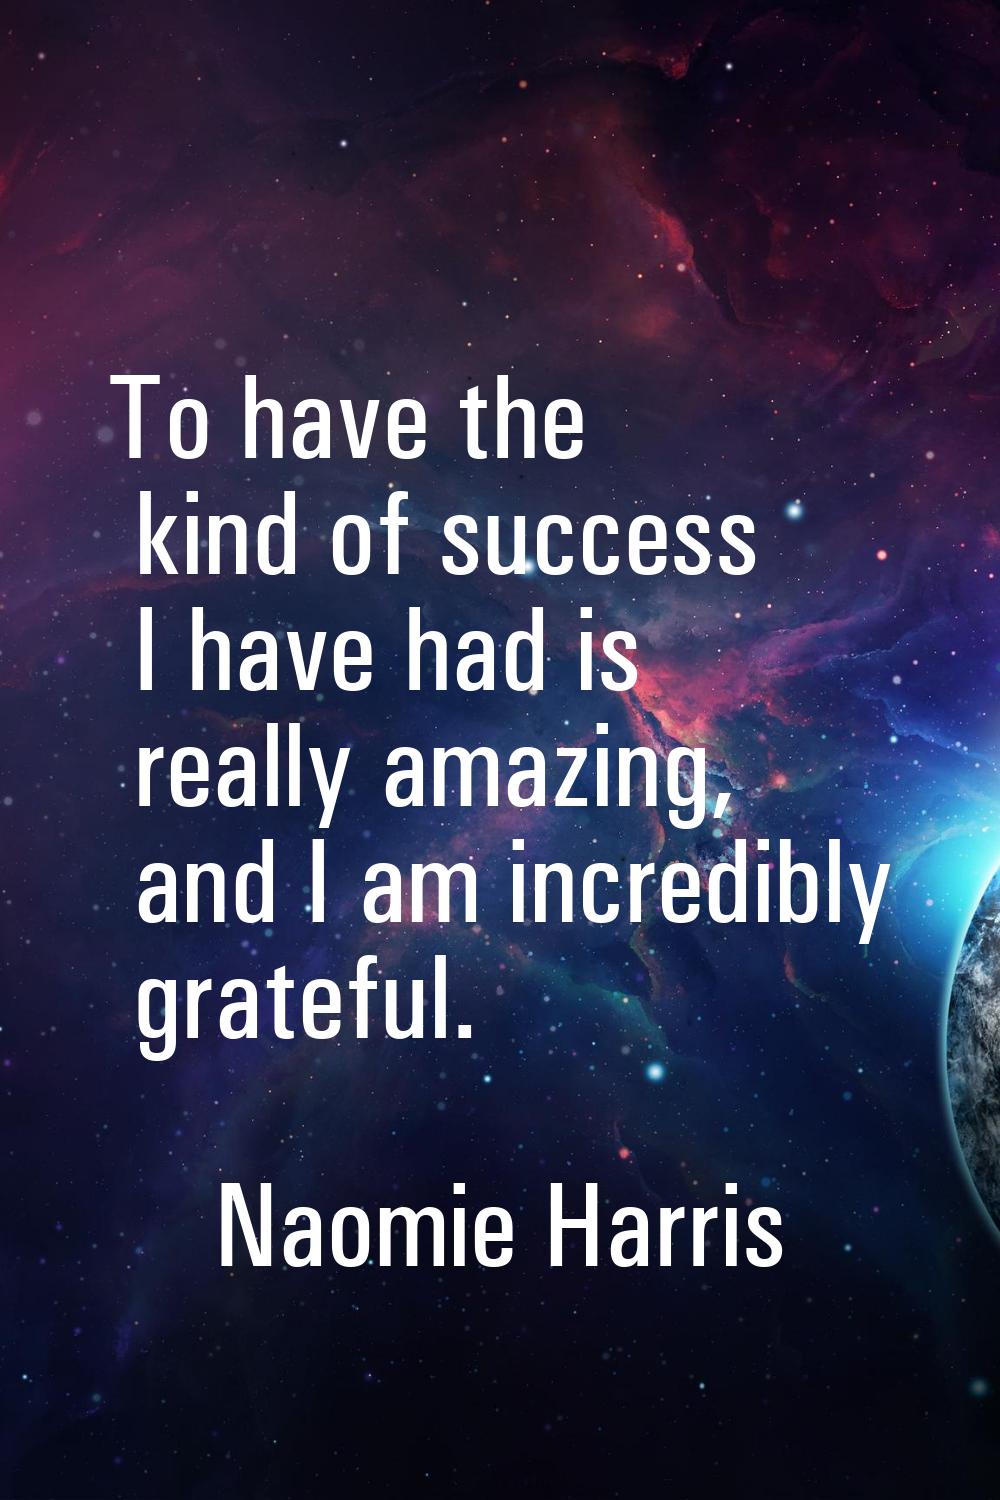 To have the kind of success I have had is really amazing, and I am incredibly grateful.